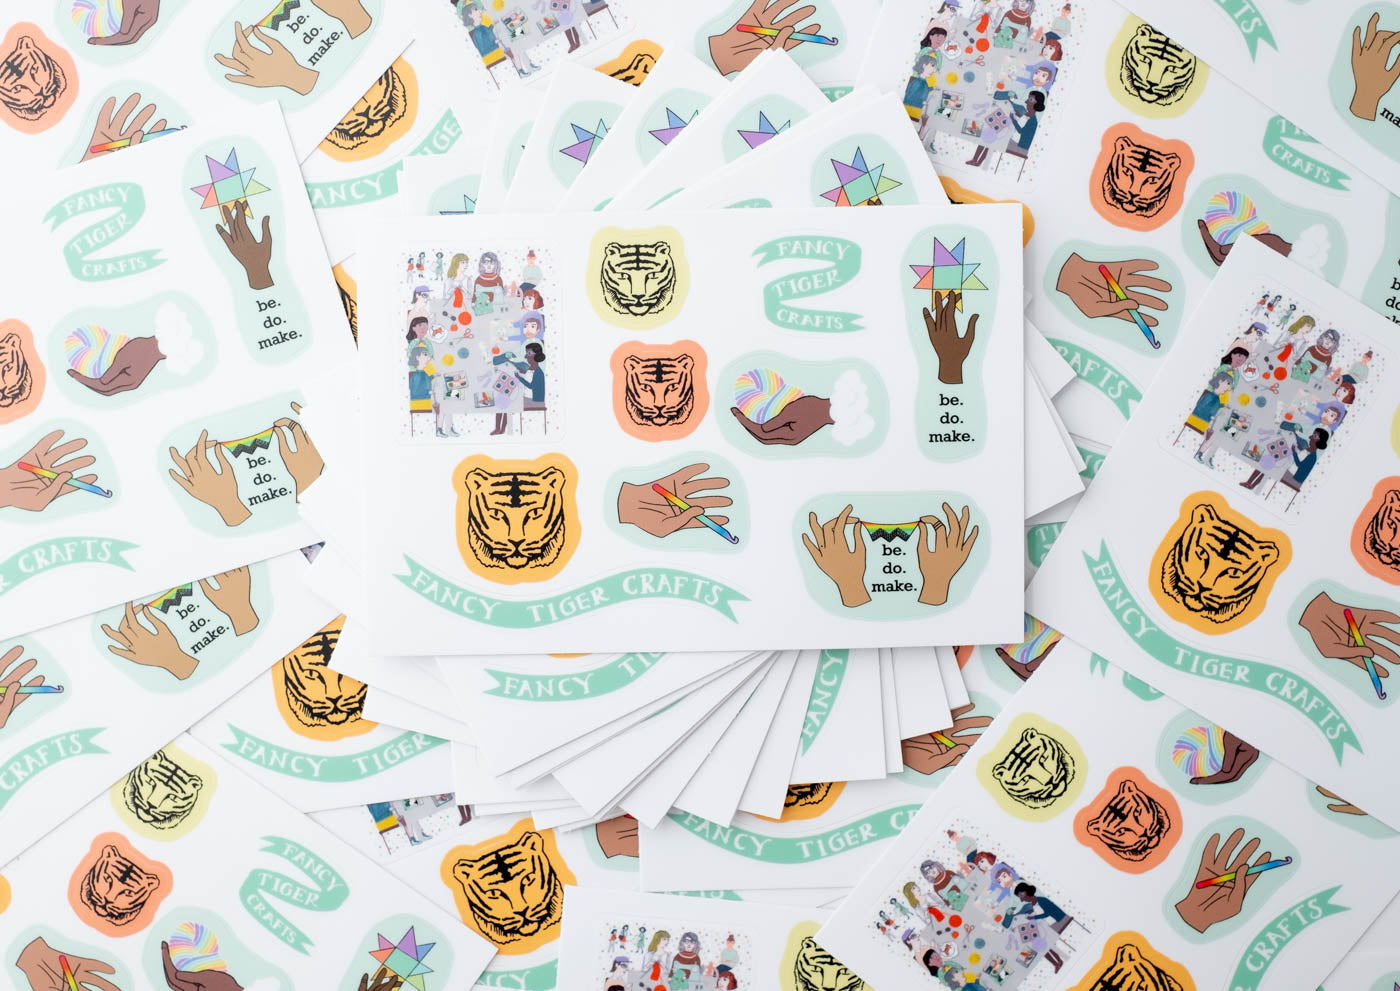 Photograph looking down on a stack of sticker sheets